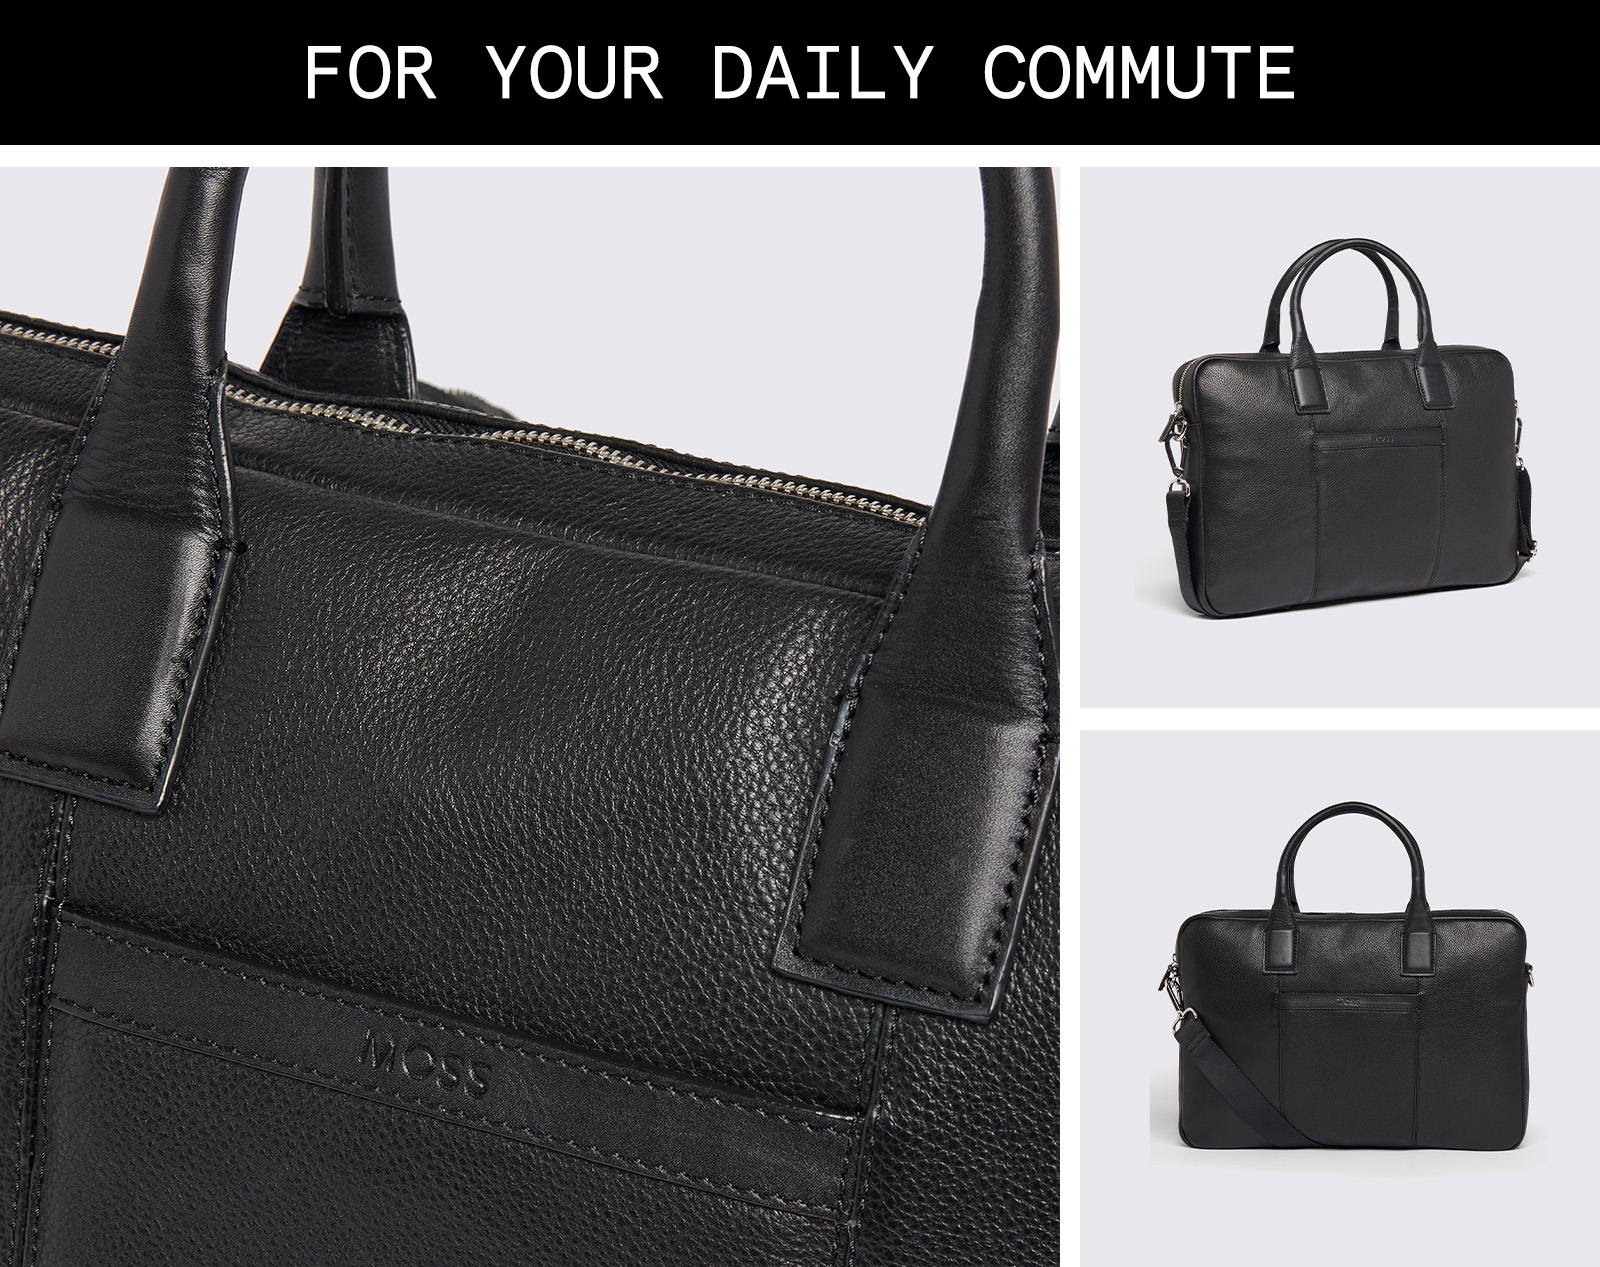 Moss - black grained leather briefcase